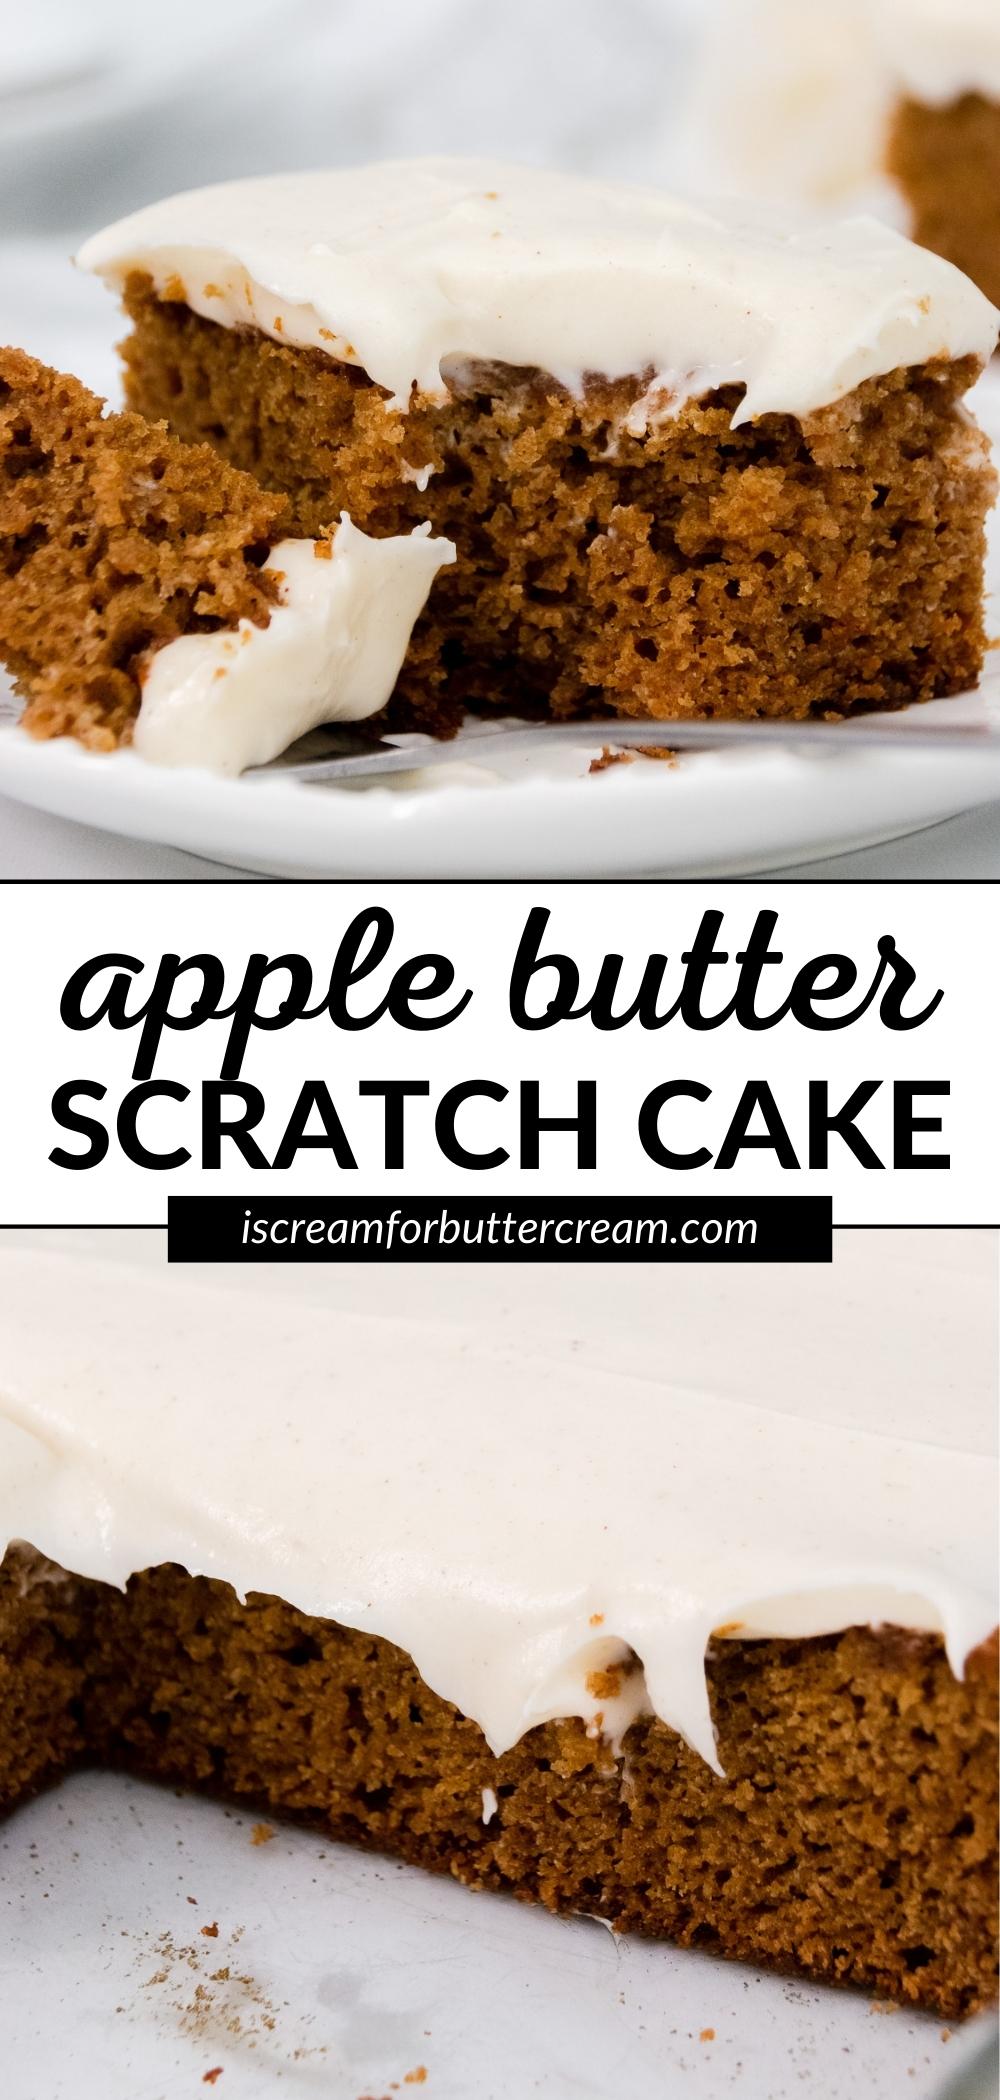 Collage of apple butter cake on white plates with text overlay.